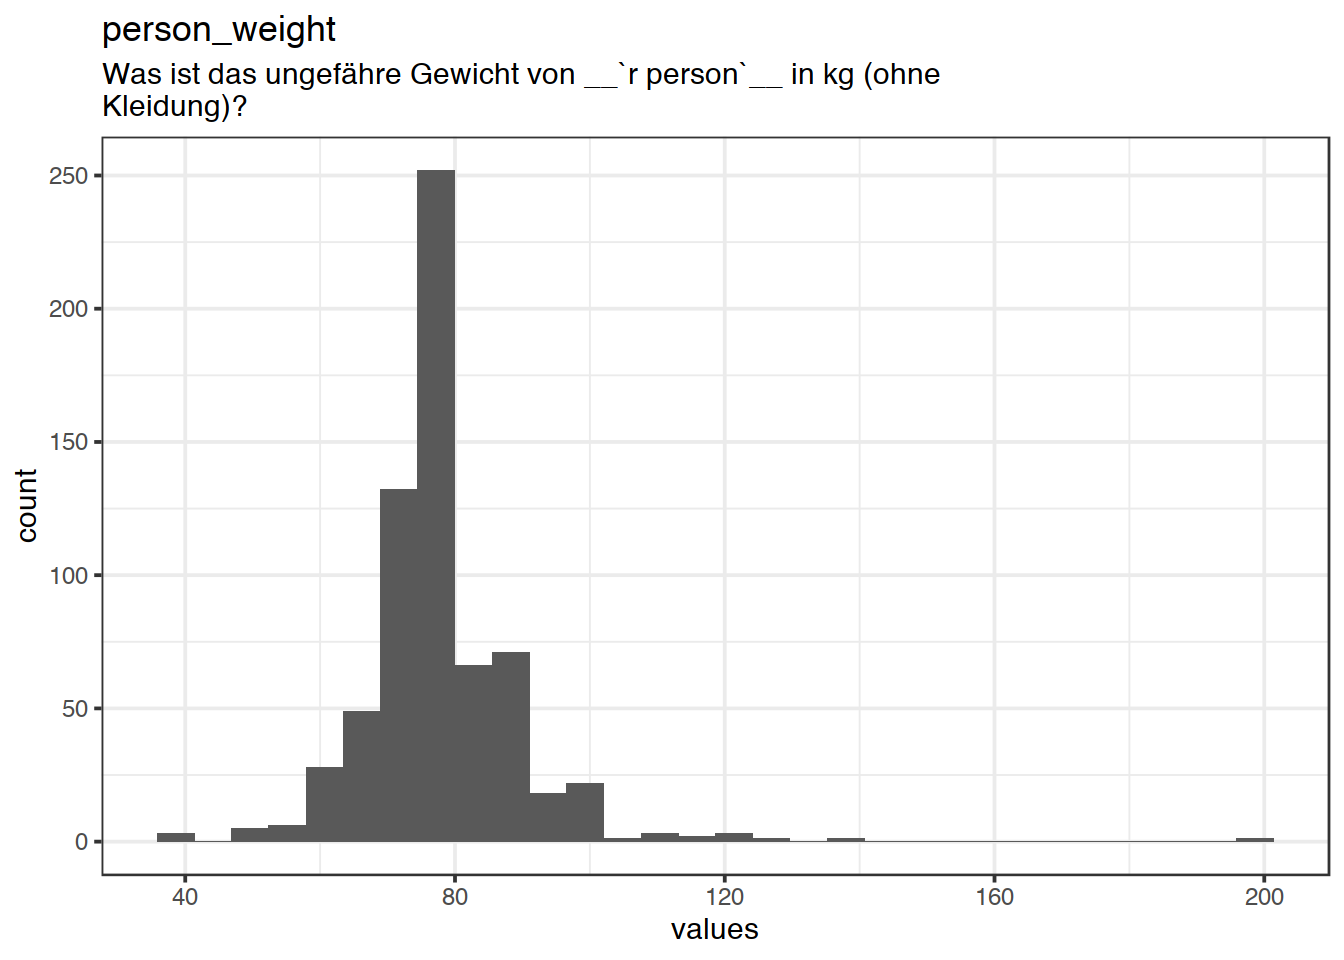 Distribution of values for person_weight